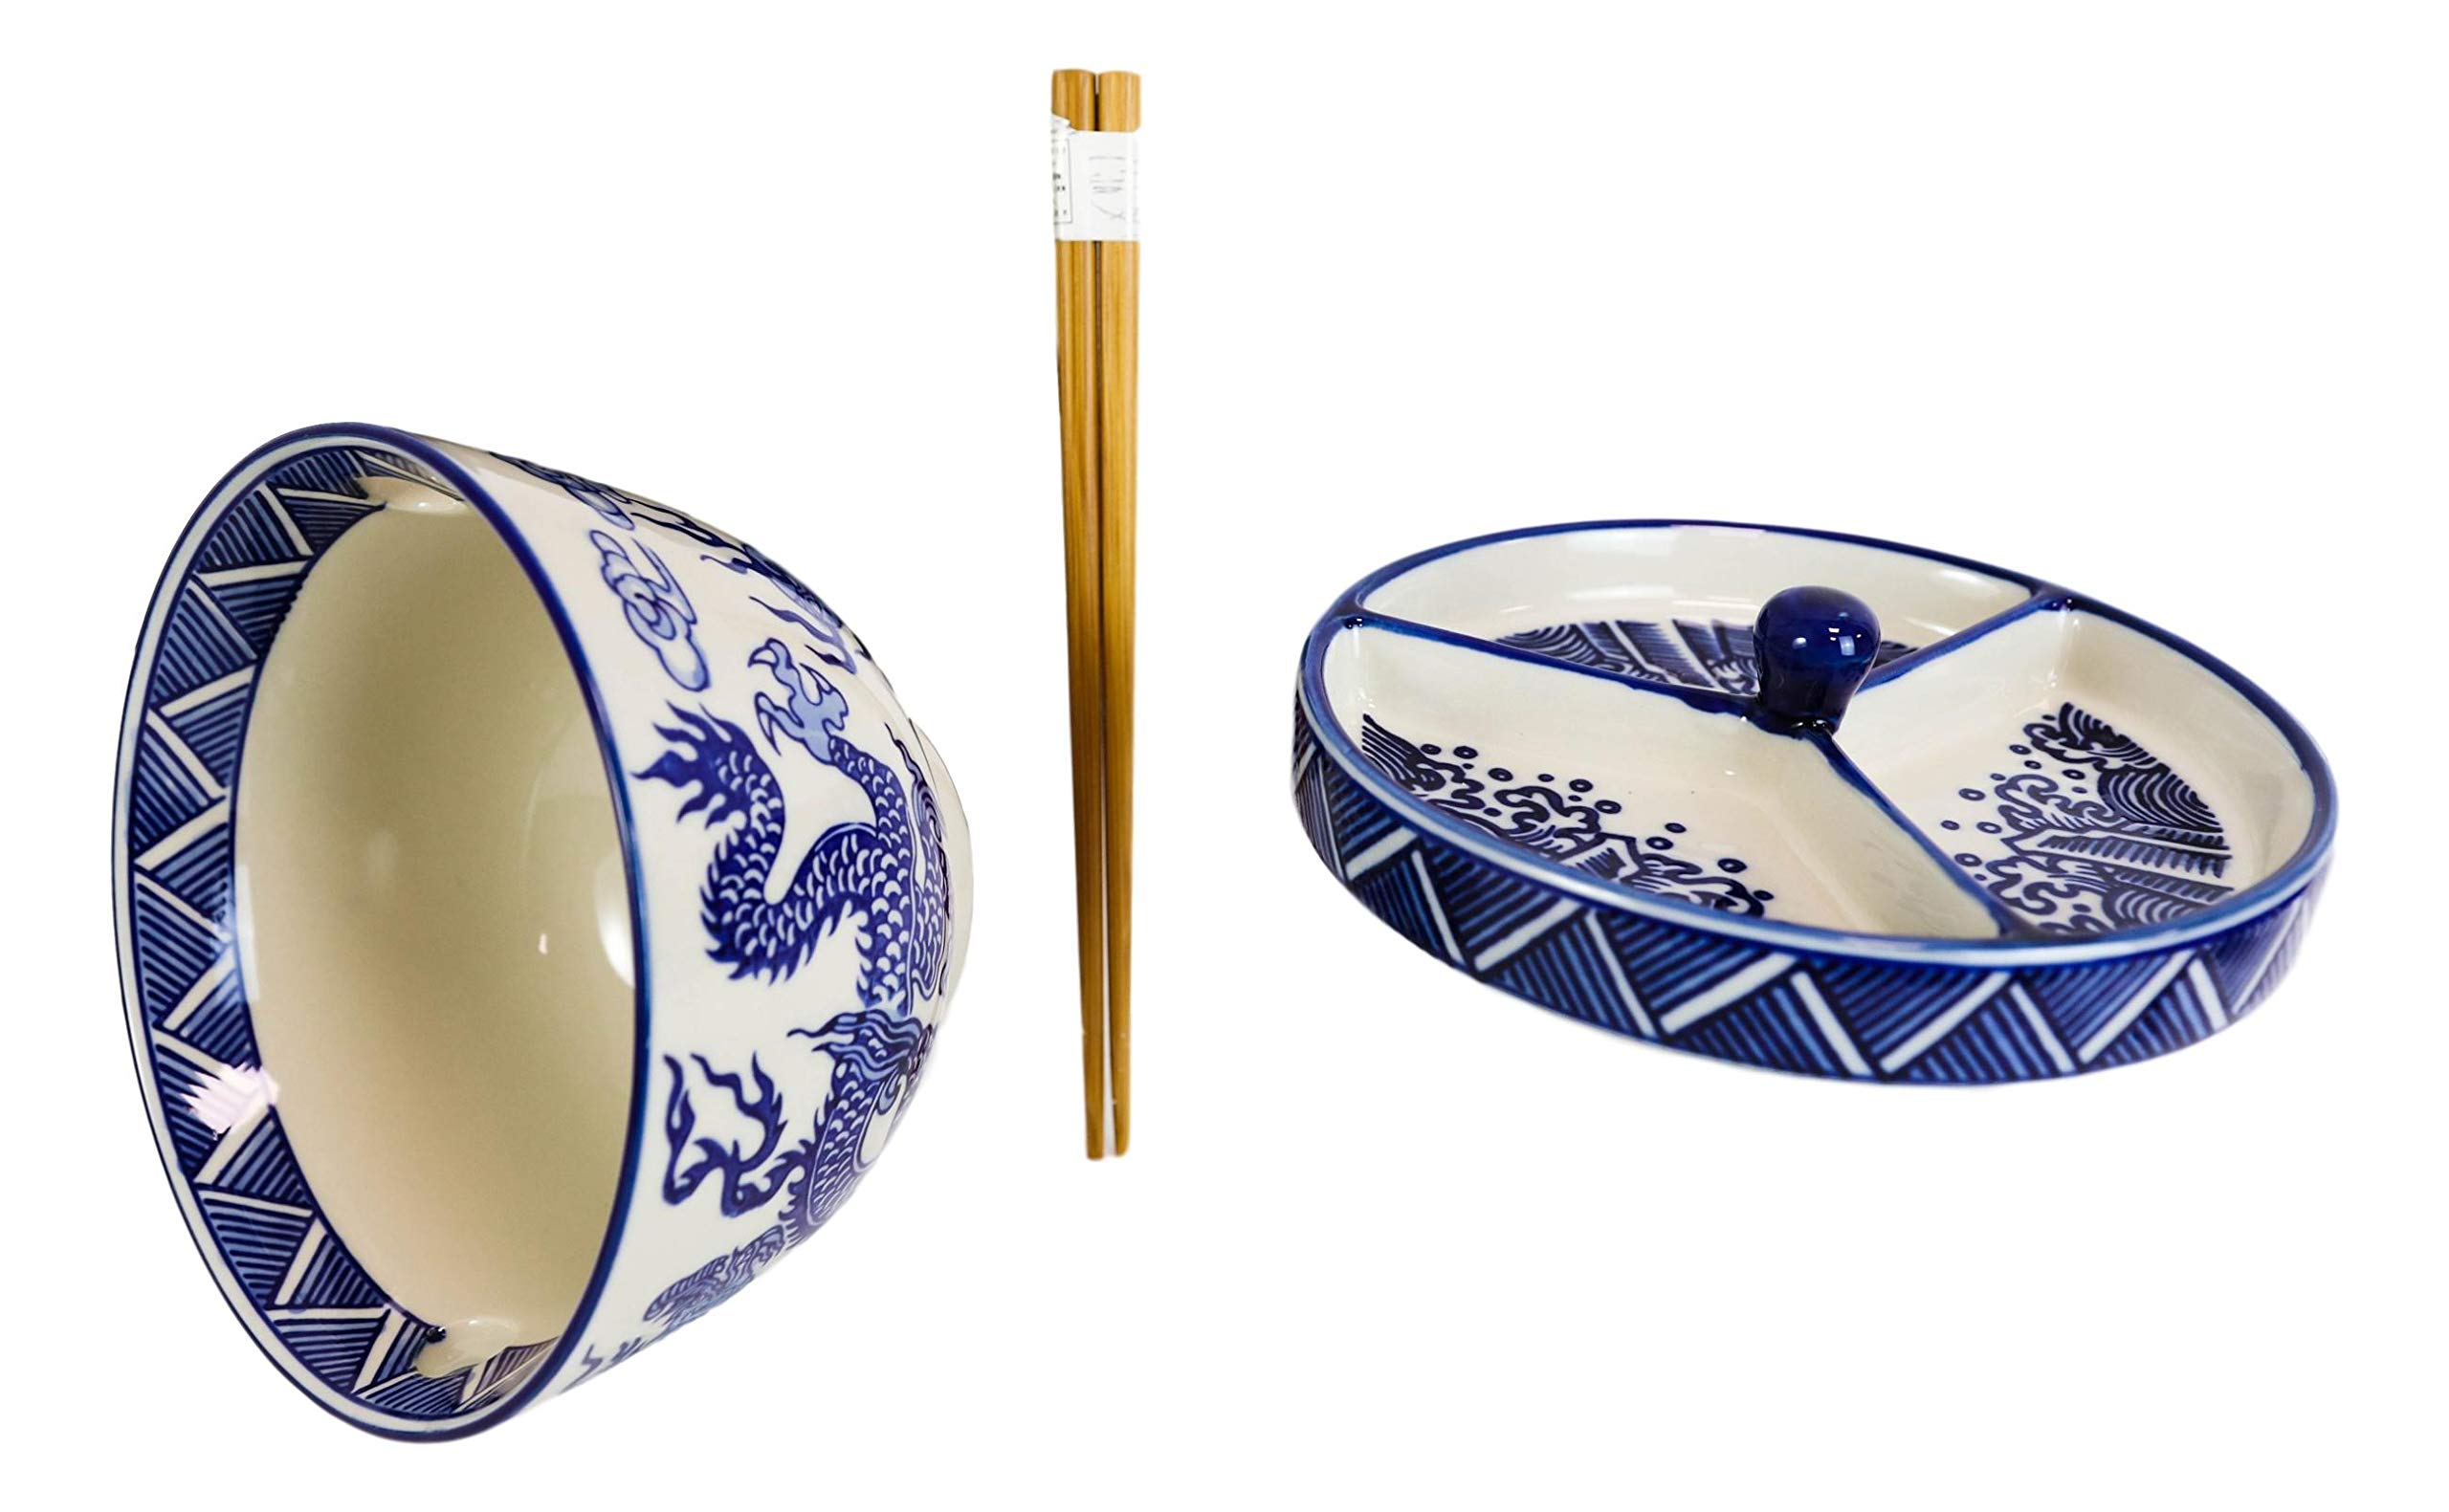 Ebros Japanese Dining Tempura Udon Noodles And Tentsuyu Dipping Sauce Large 6"D Bowl With Condiment Divider Lid And Bamboo Chopsticks And Built In Rest Set (Blue White Oriental Feng Shui Dragon King)